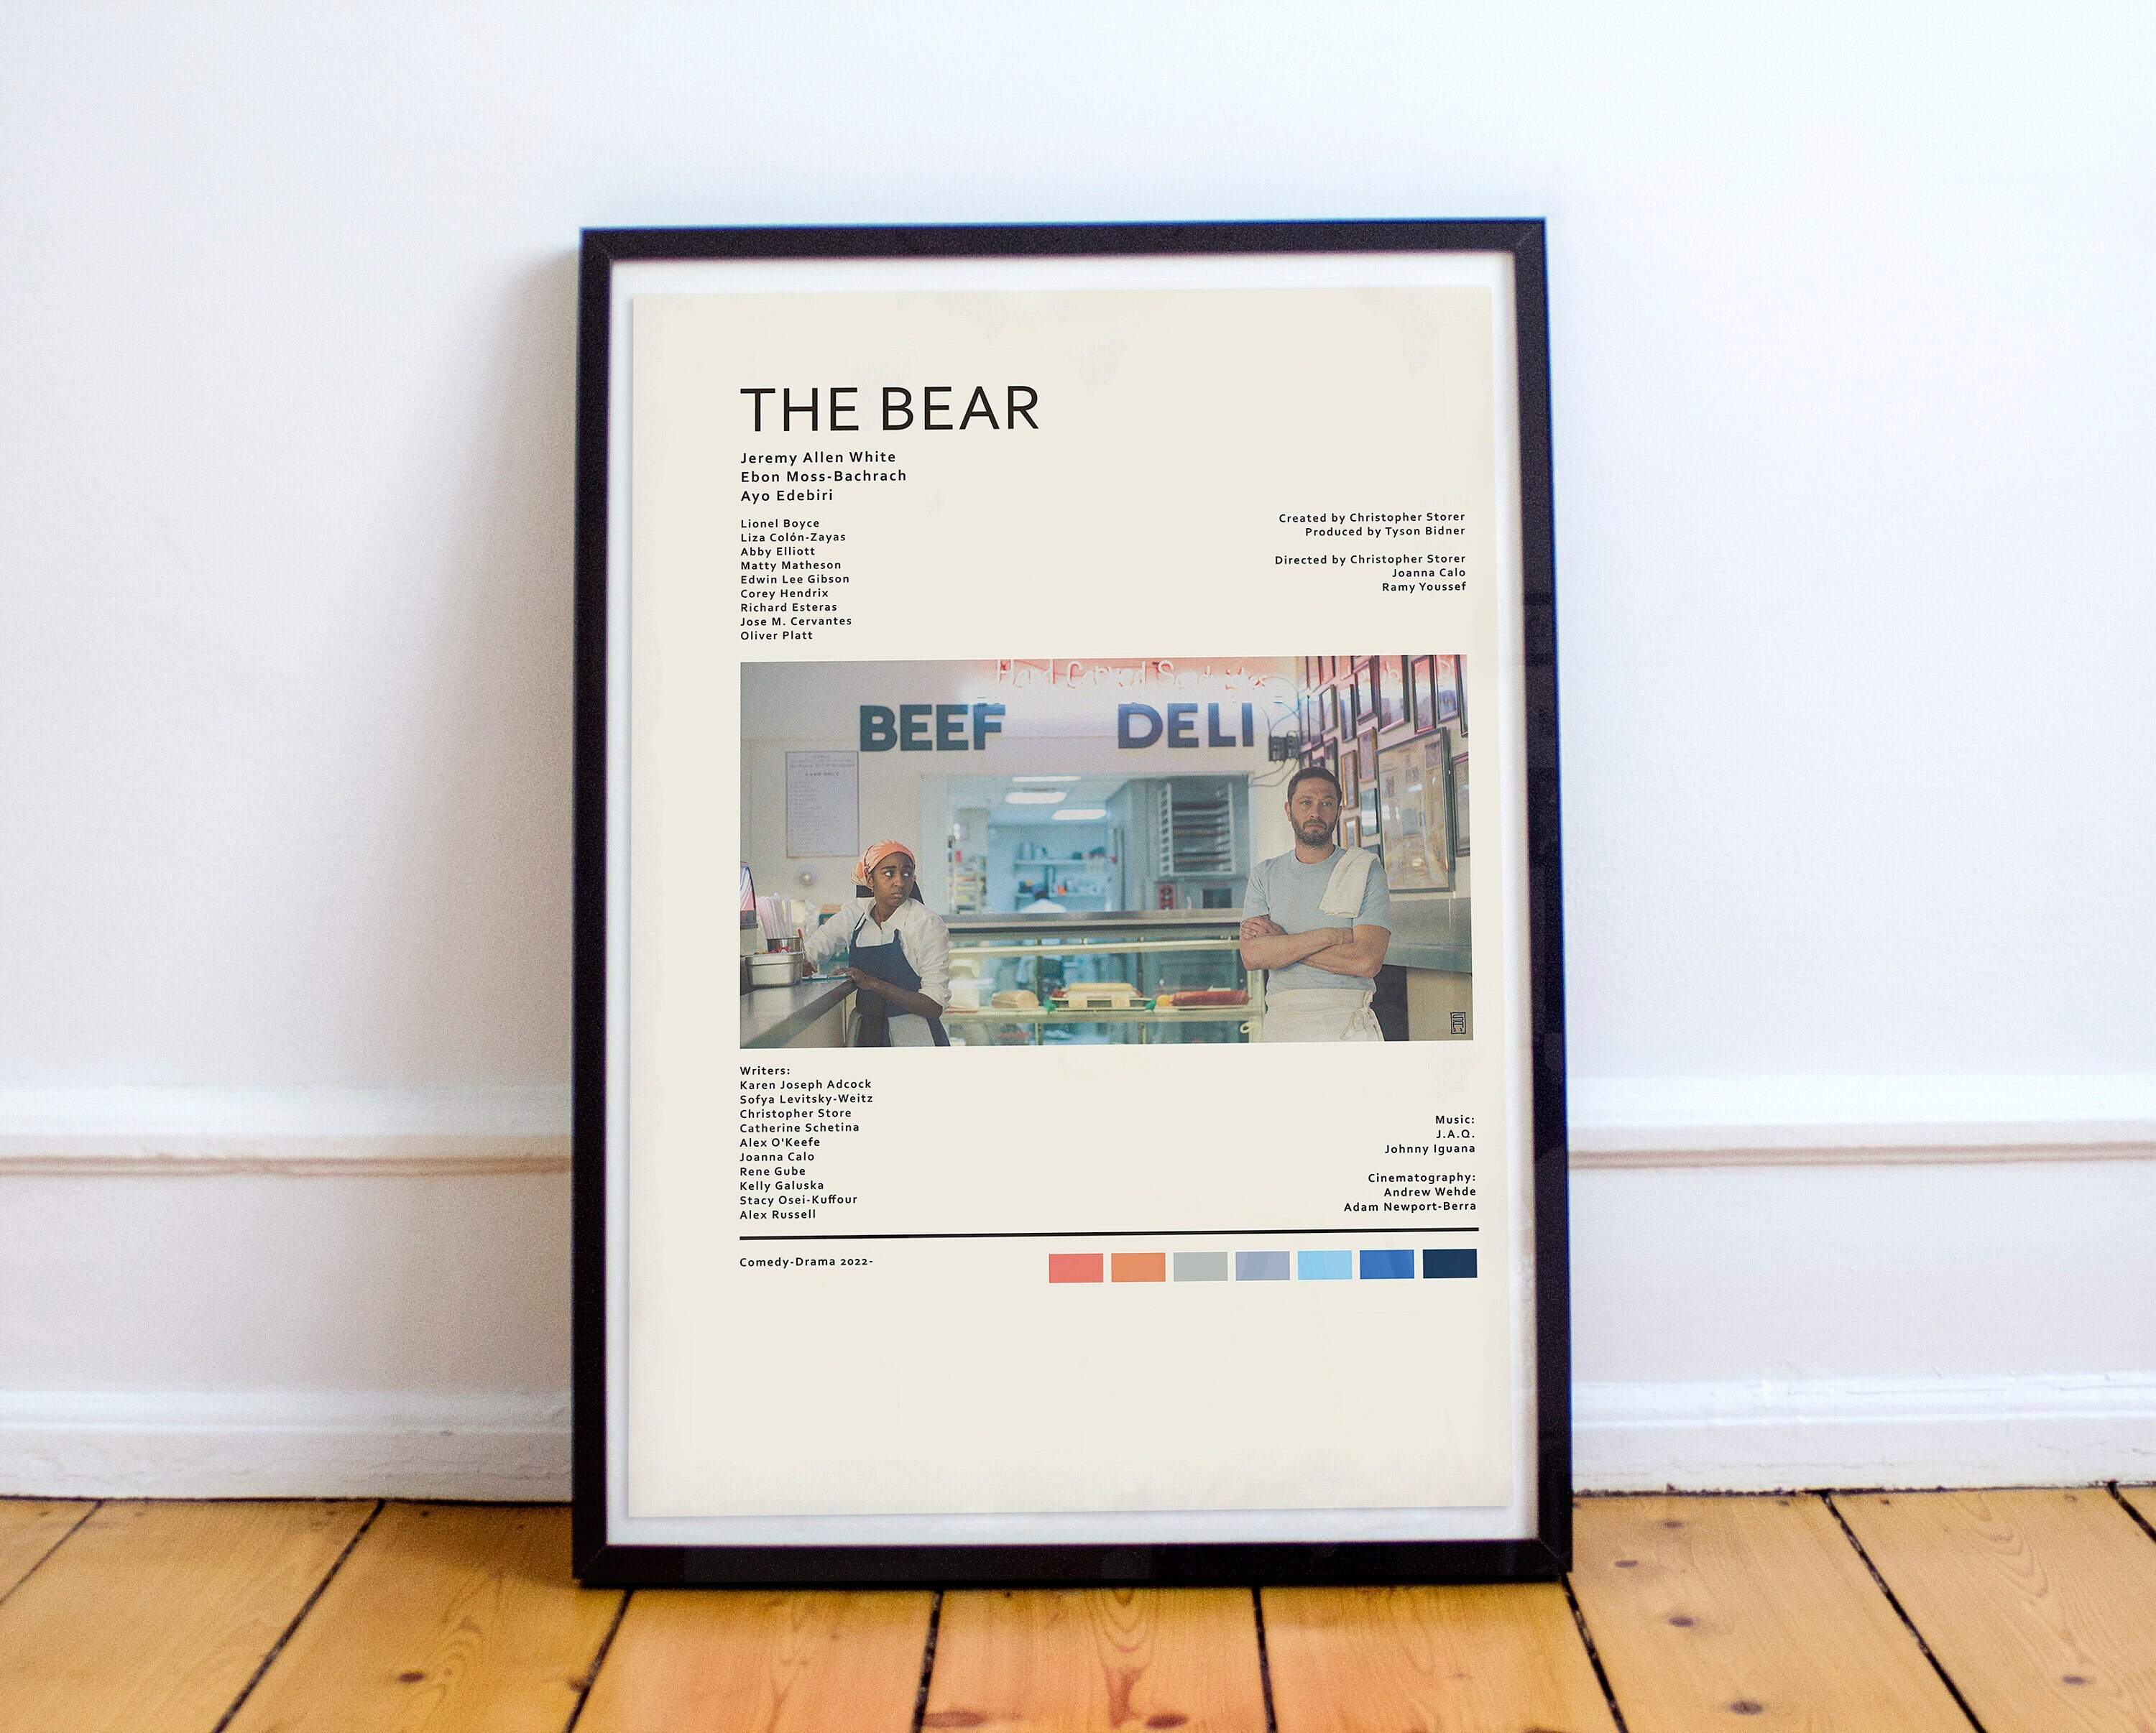 The Bear TV Show Poster, Jeremey Allen White The Beef Photo Art Print